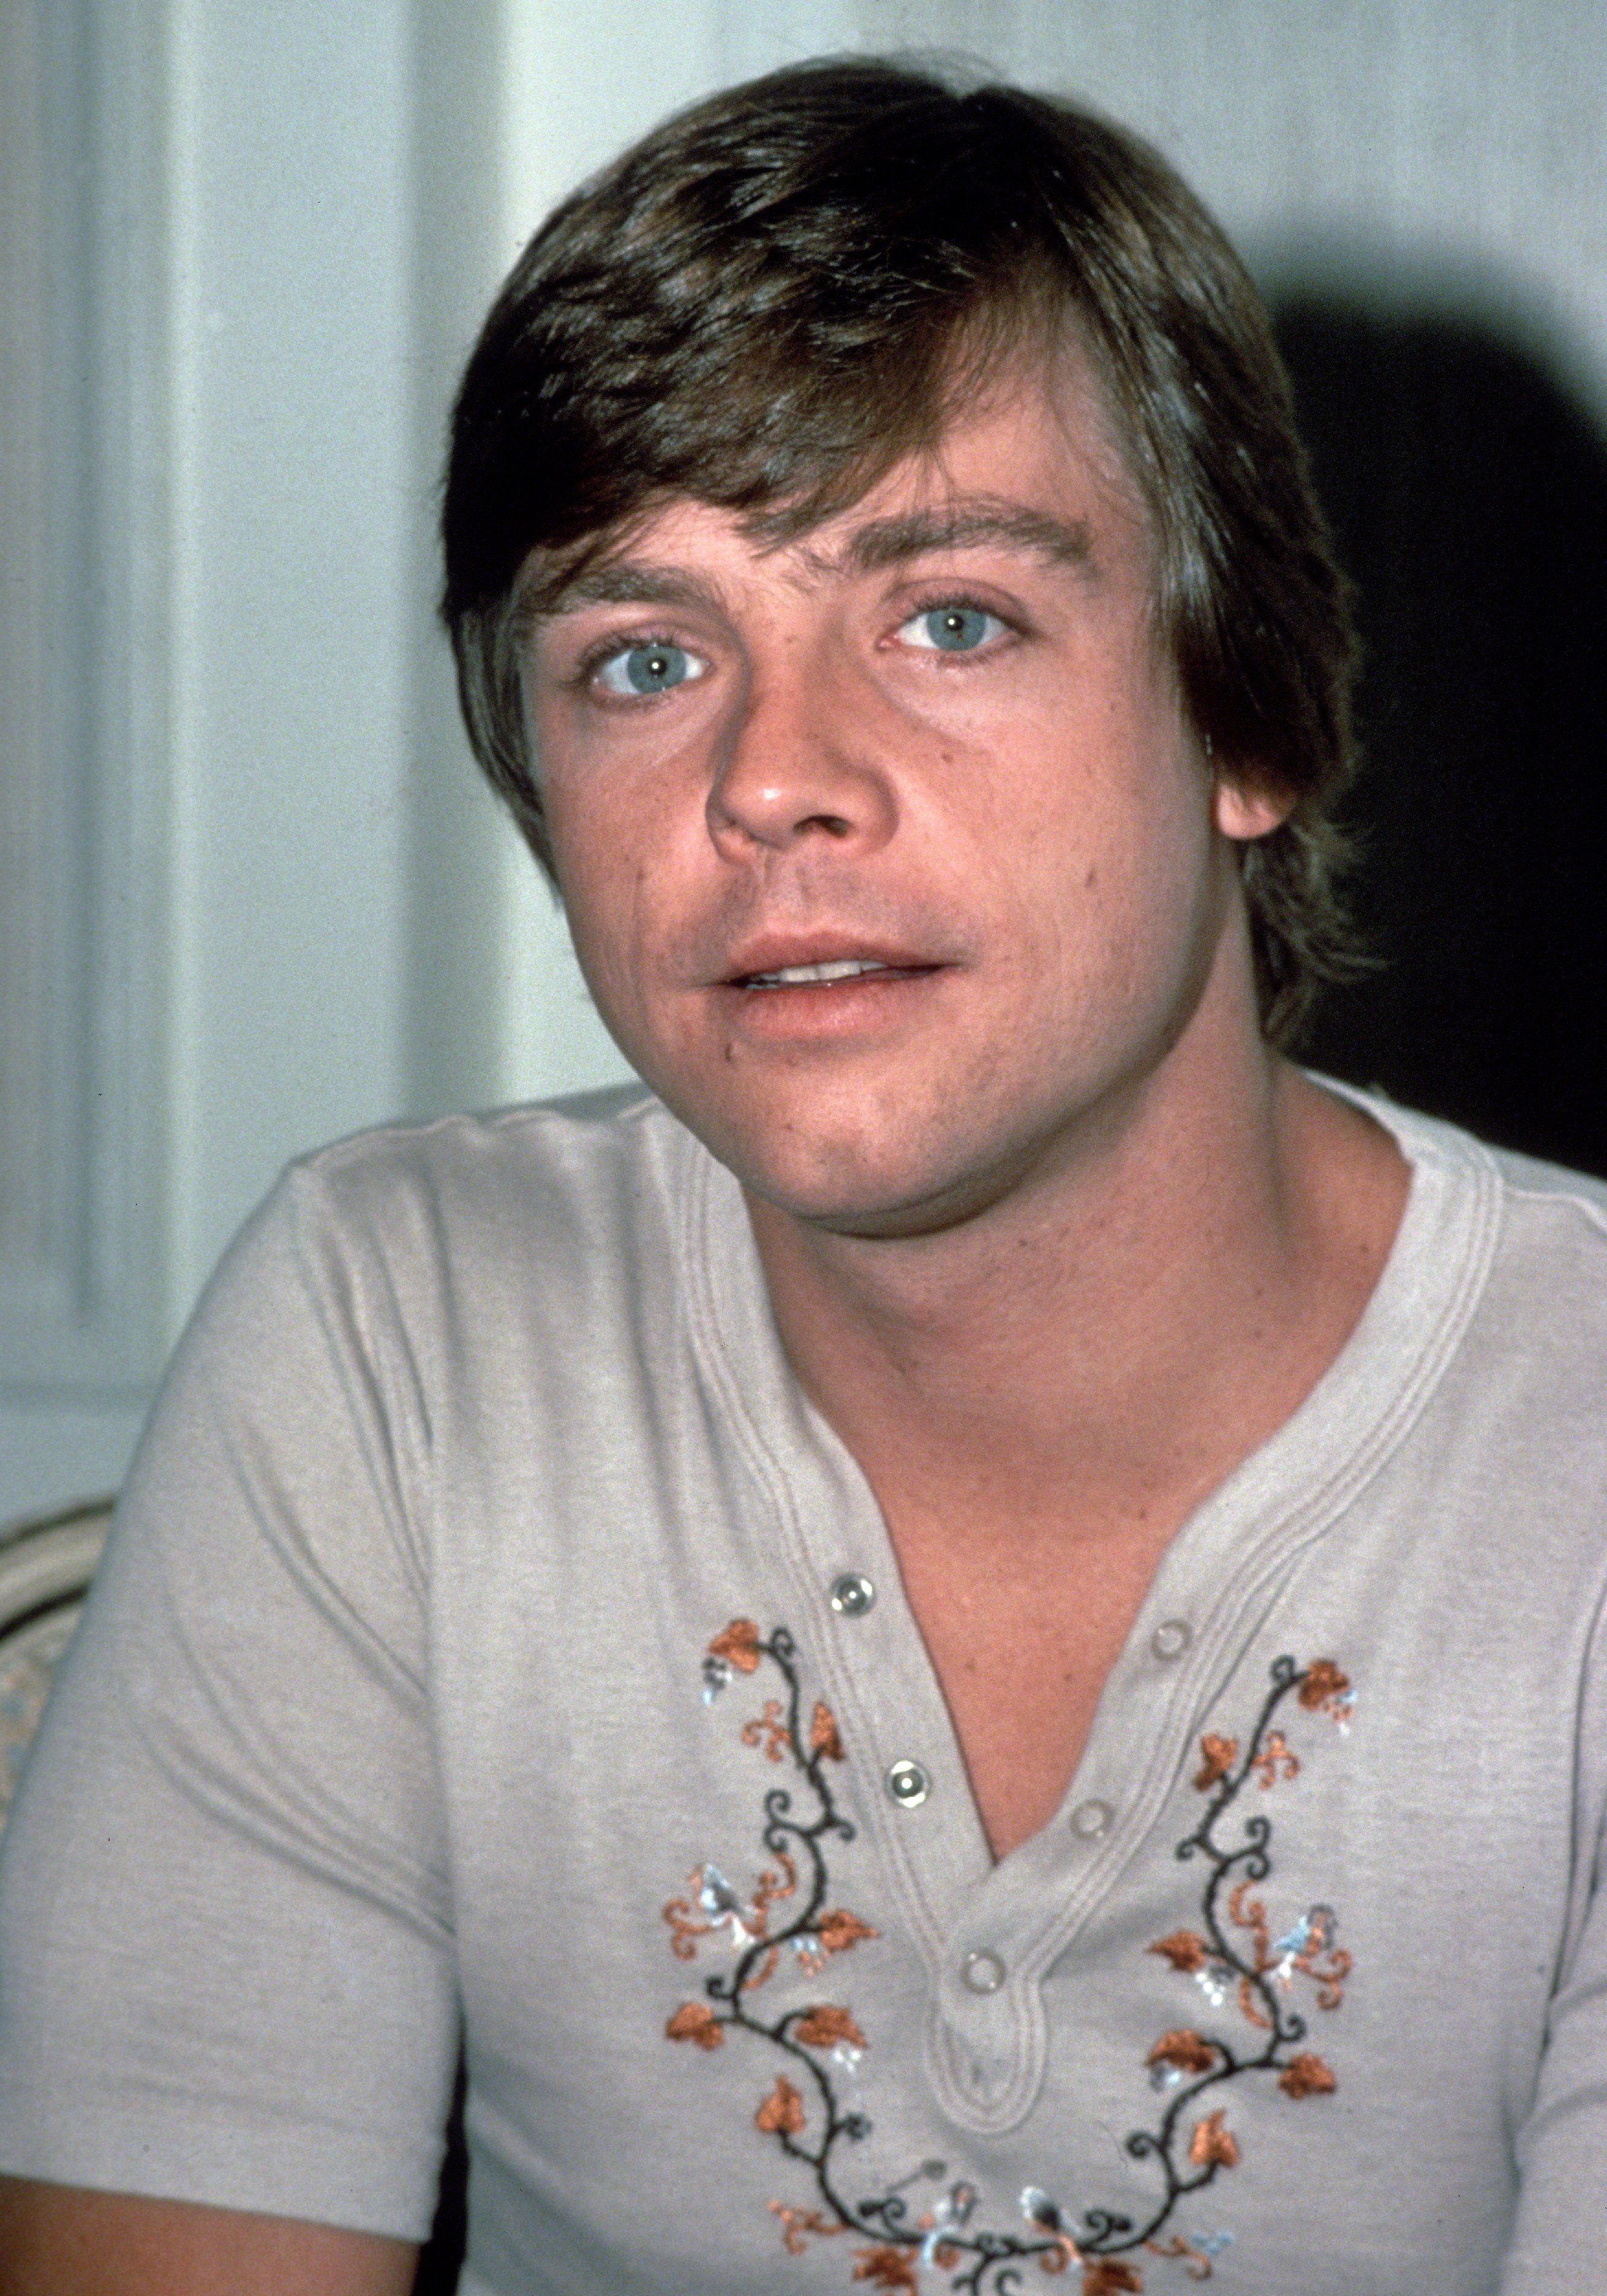 Mark Hamill circa 1980 in New York City. | Source: Getty Images